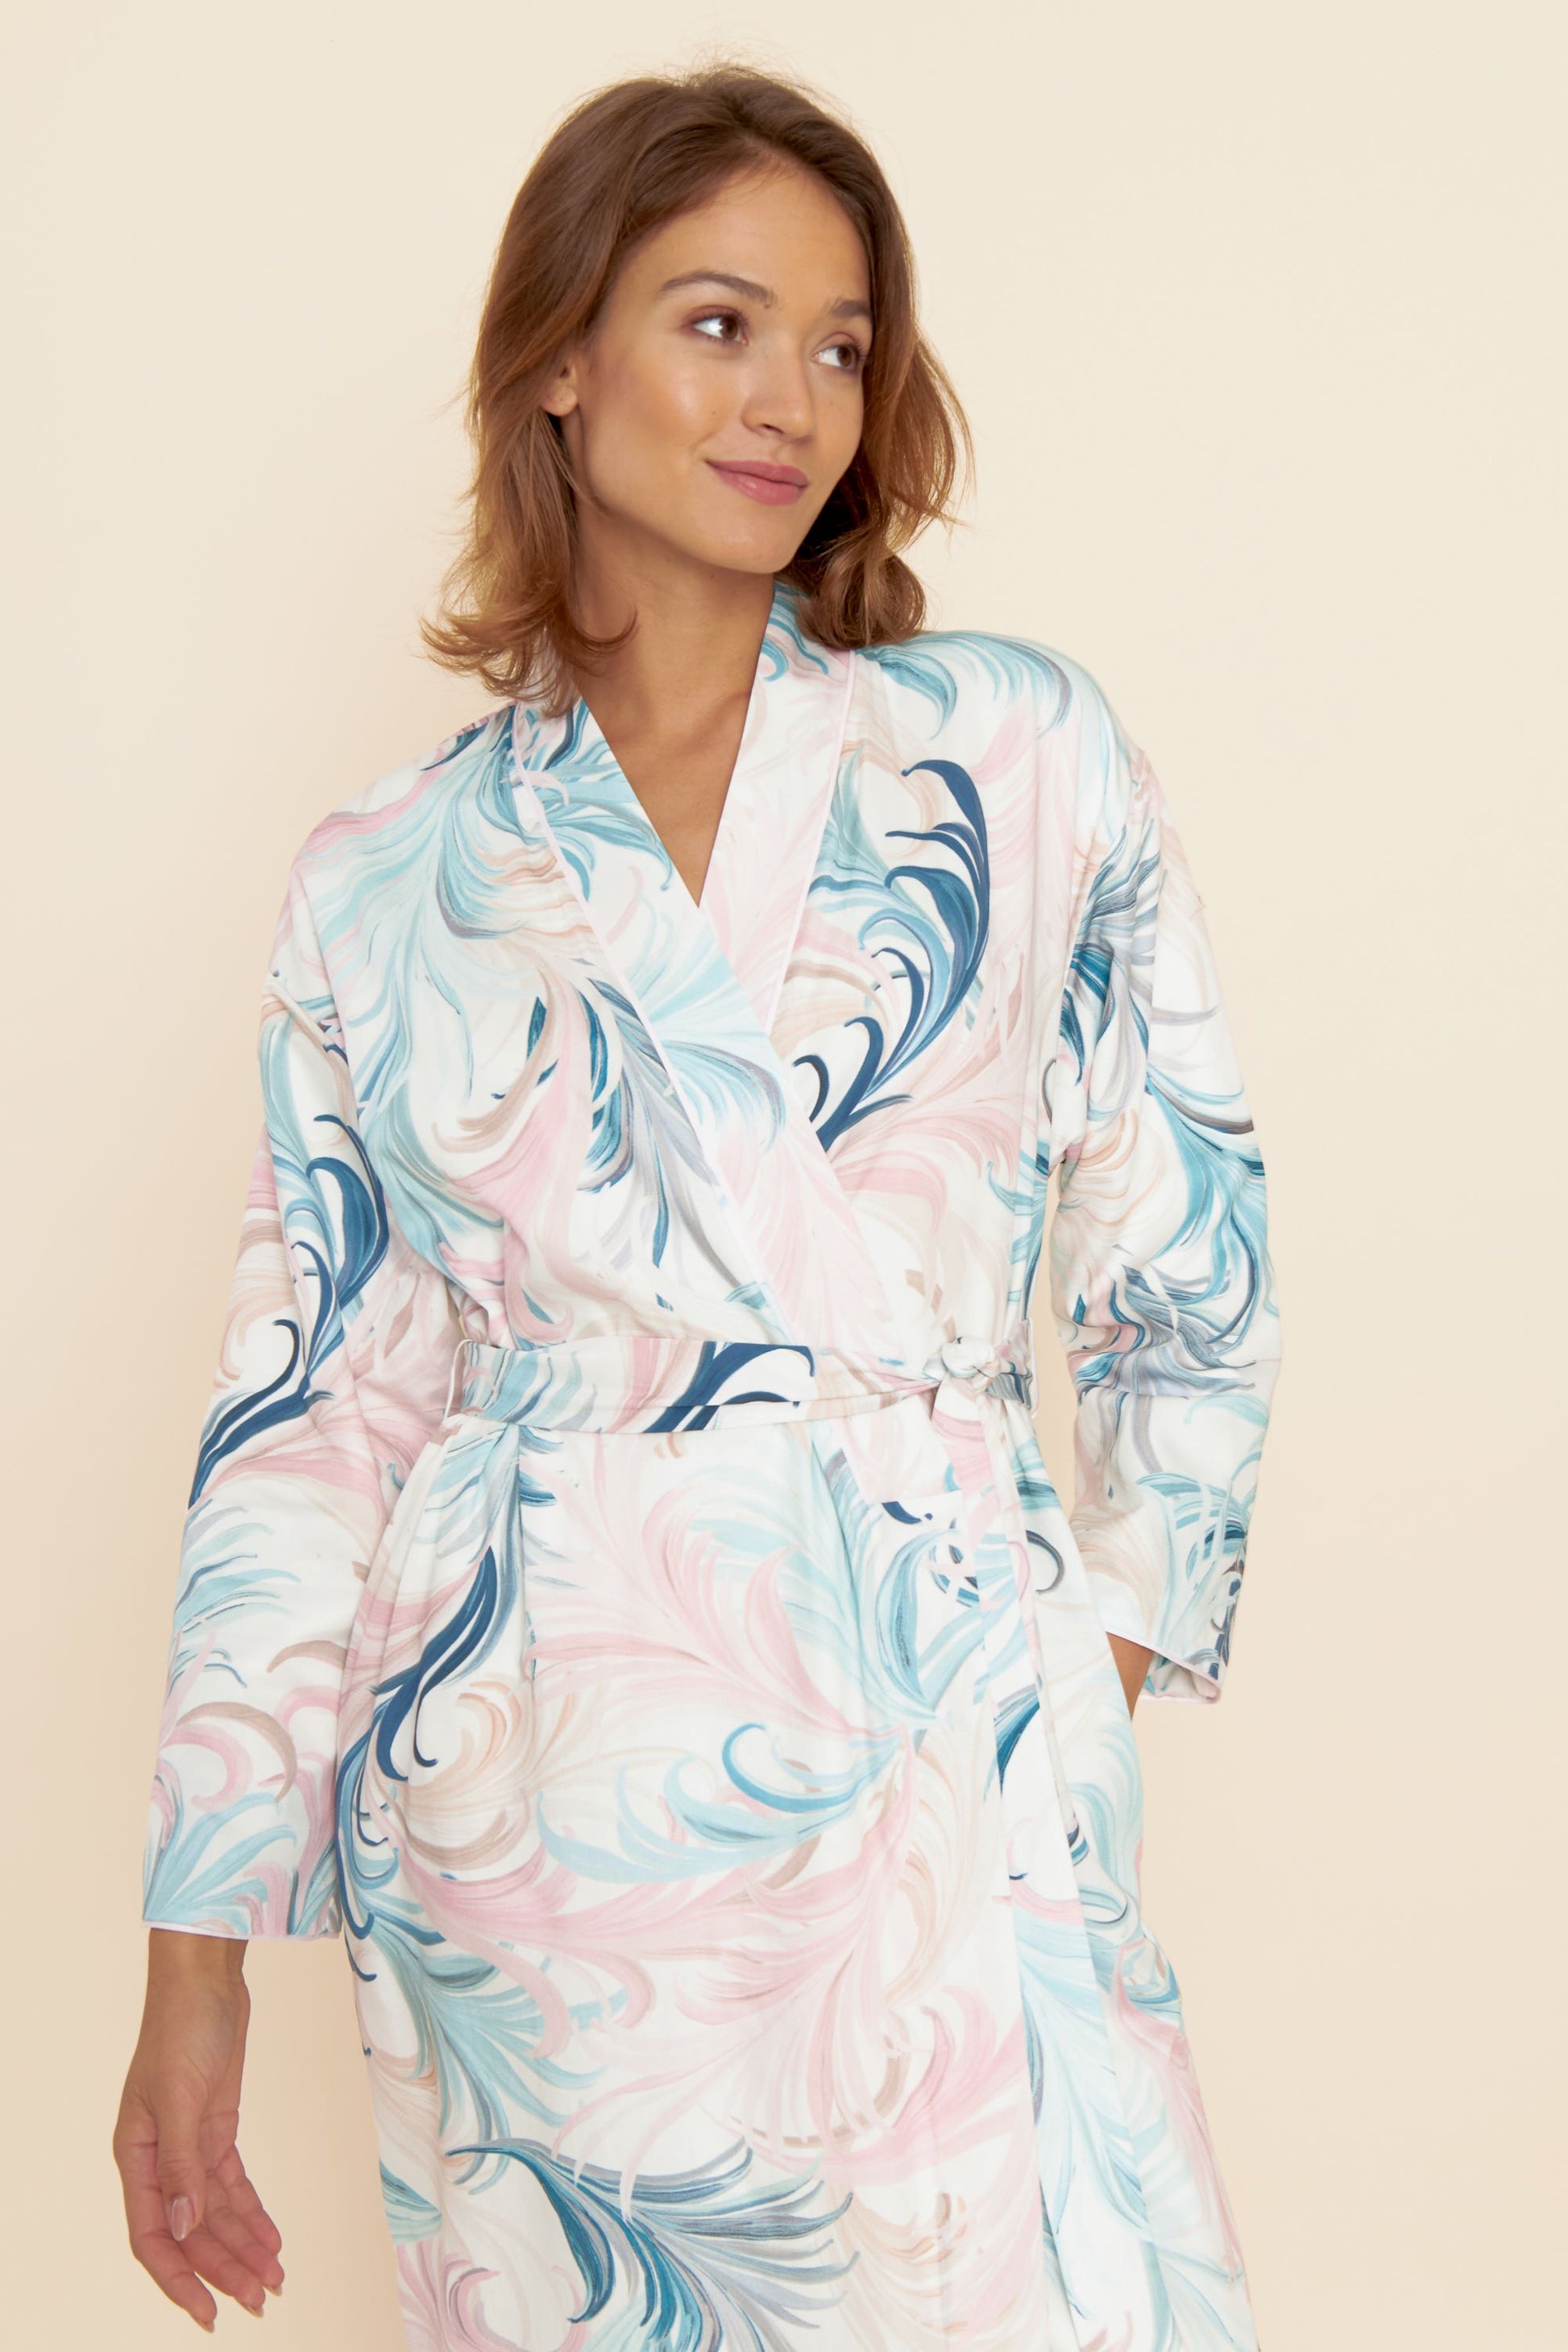 The High Class line from Féraud Paris offers a luxurious kimono-styled robe with cotton satin and terrycloth lining, featuring a romantic feather pattern.